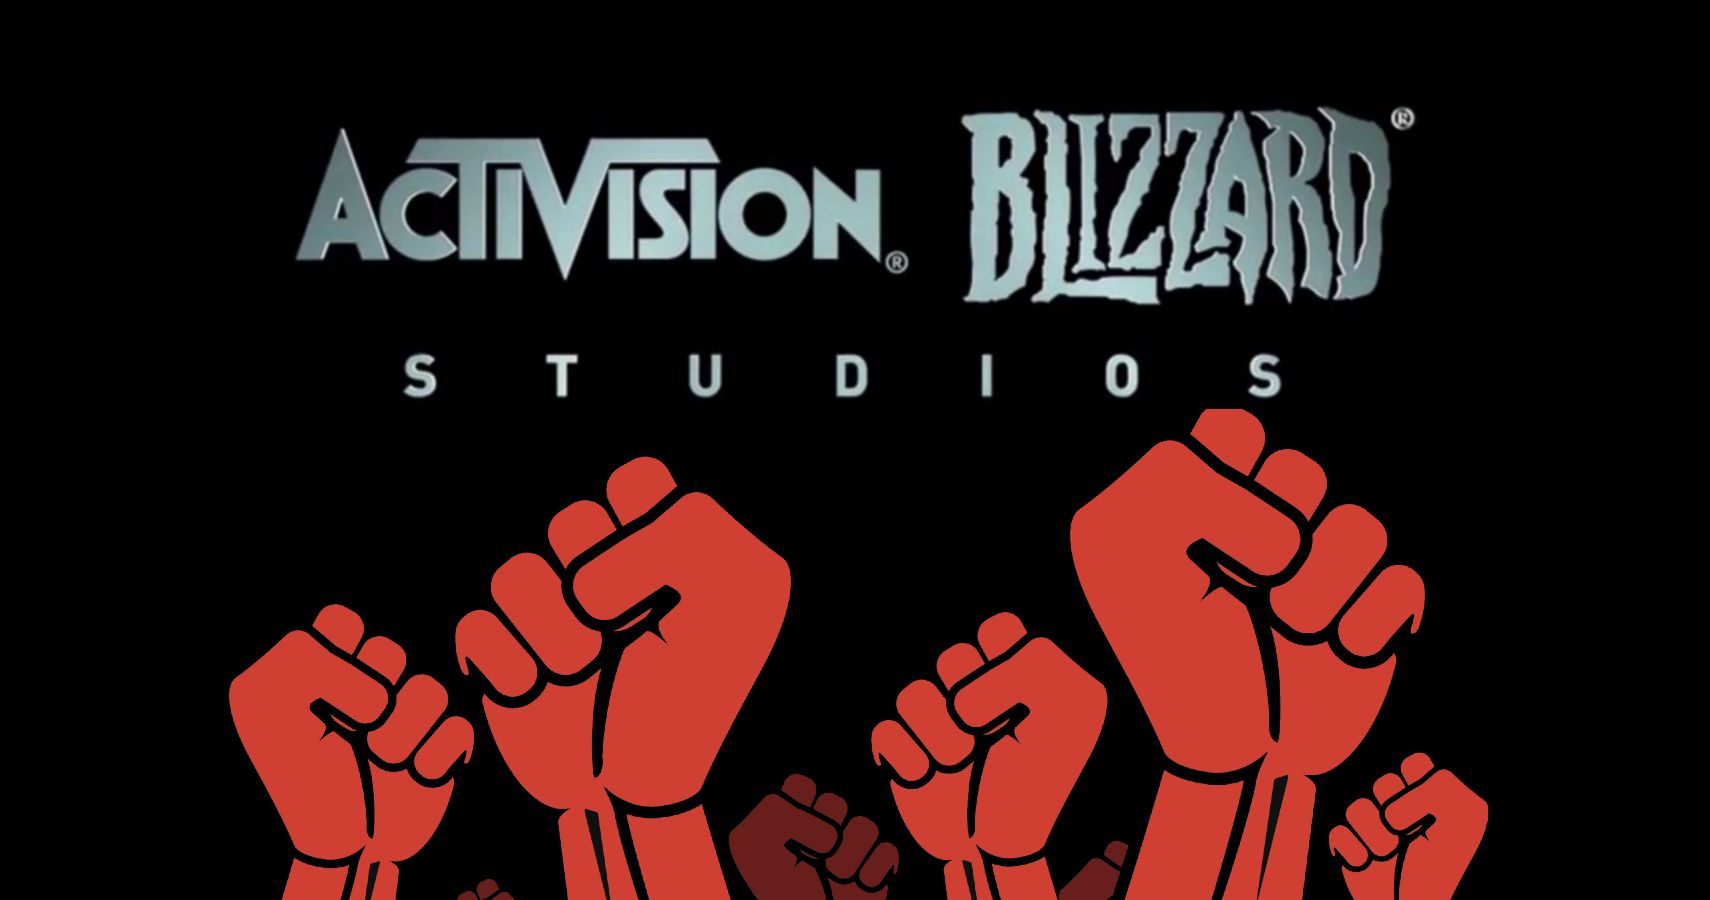 Many Blizzard Workers Are Collectively Seeking Pay Increases, Is A Union In Sight?